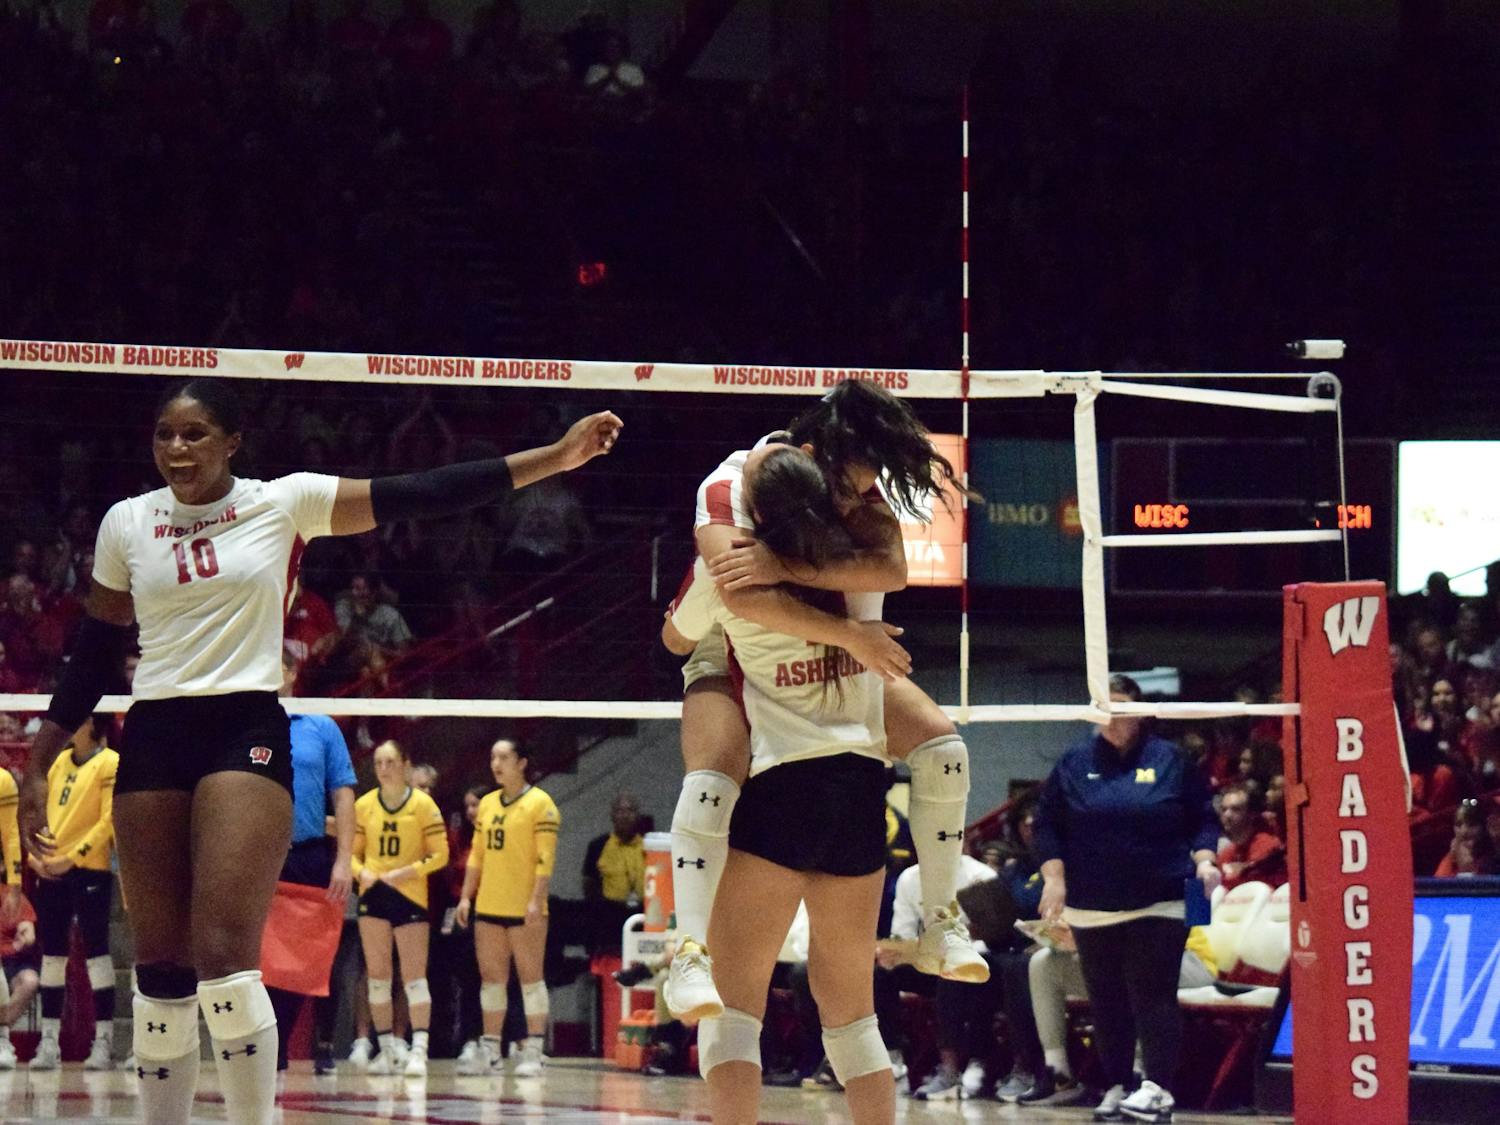 PHOTOS: Wisconsin Volleyball sweeps Michigan in easy 3-0 win